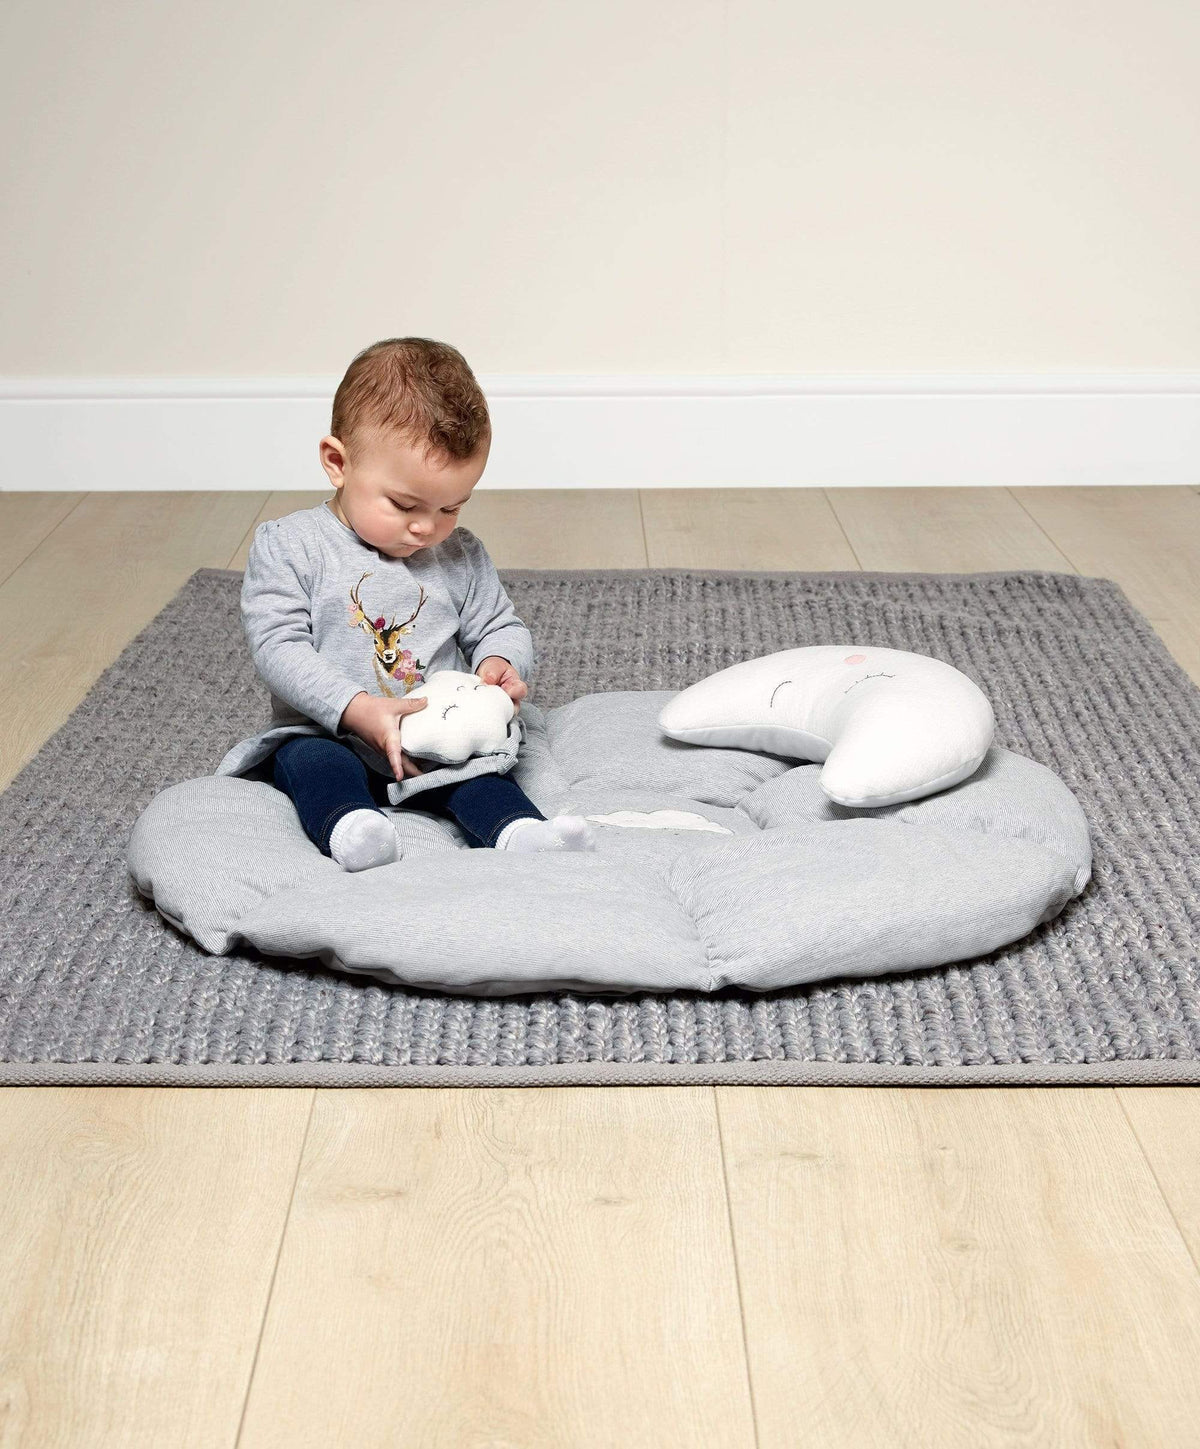 Muslin Baby Play Mat | Playpen Mat - Large Padded Tummy Time Activity Mat  for Infant & Toddler, Grey